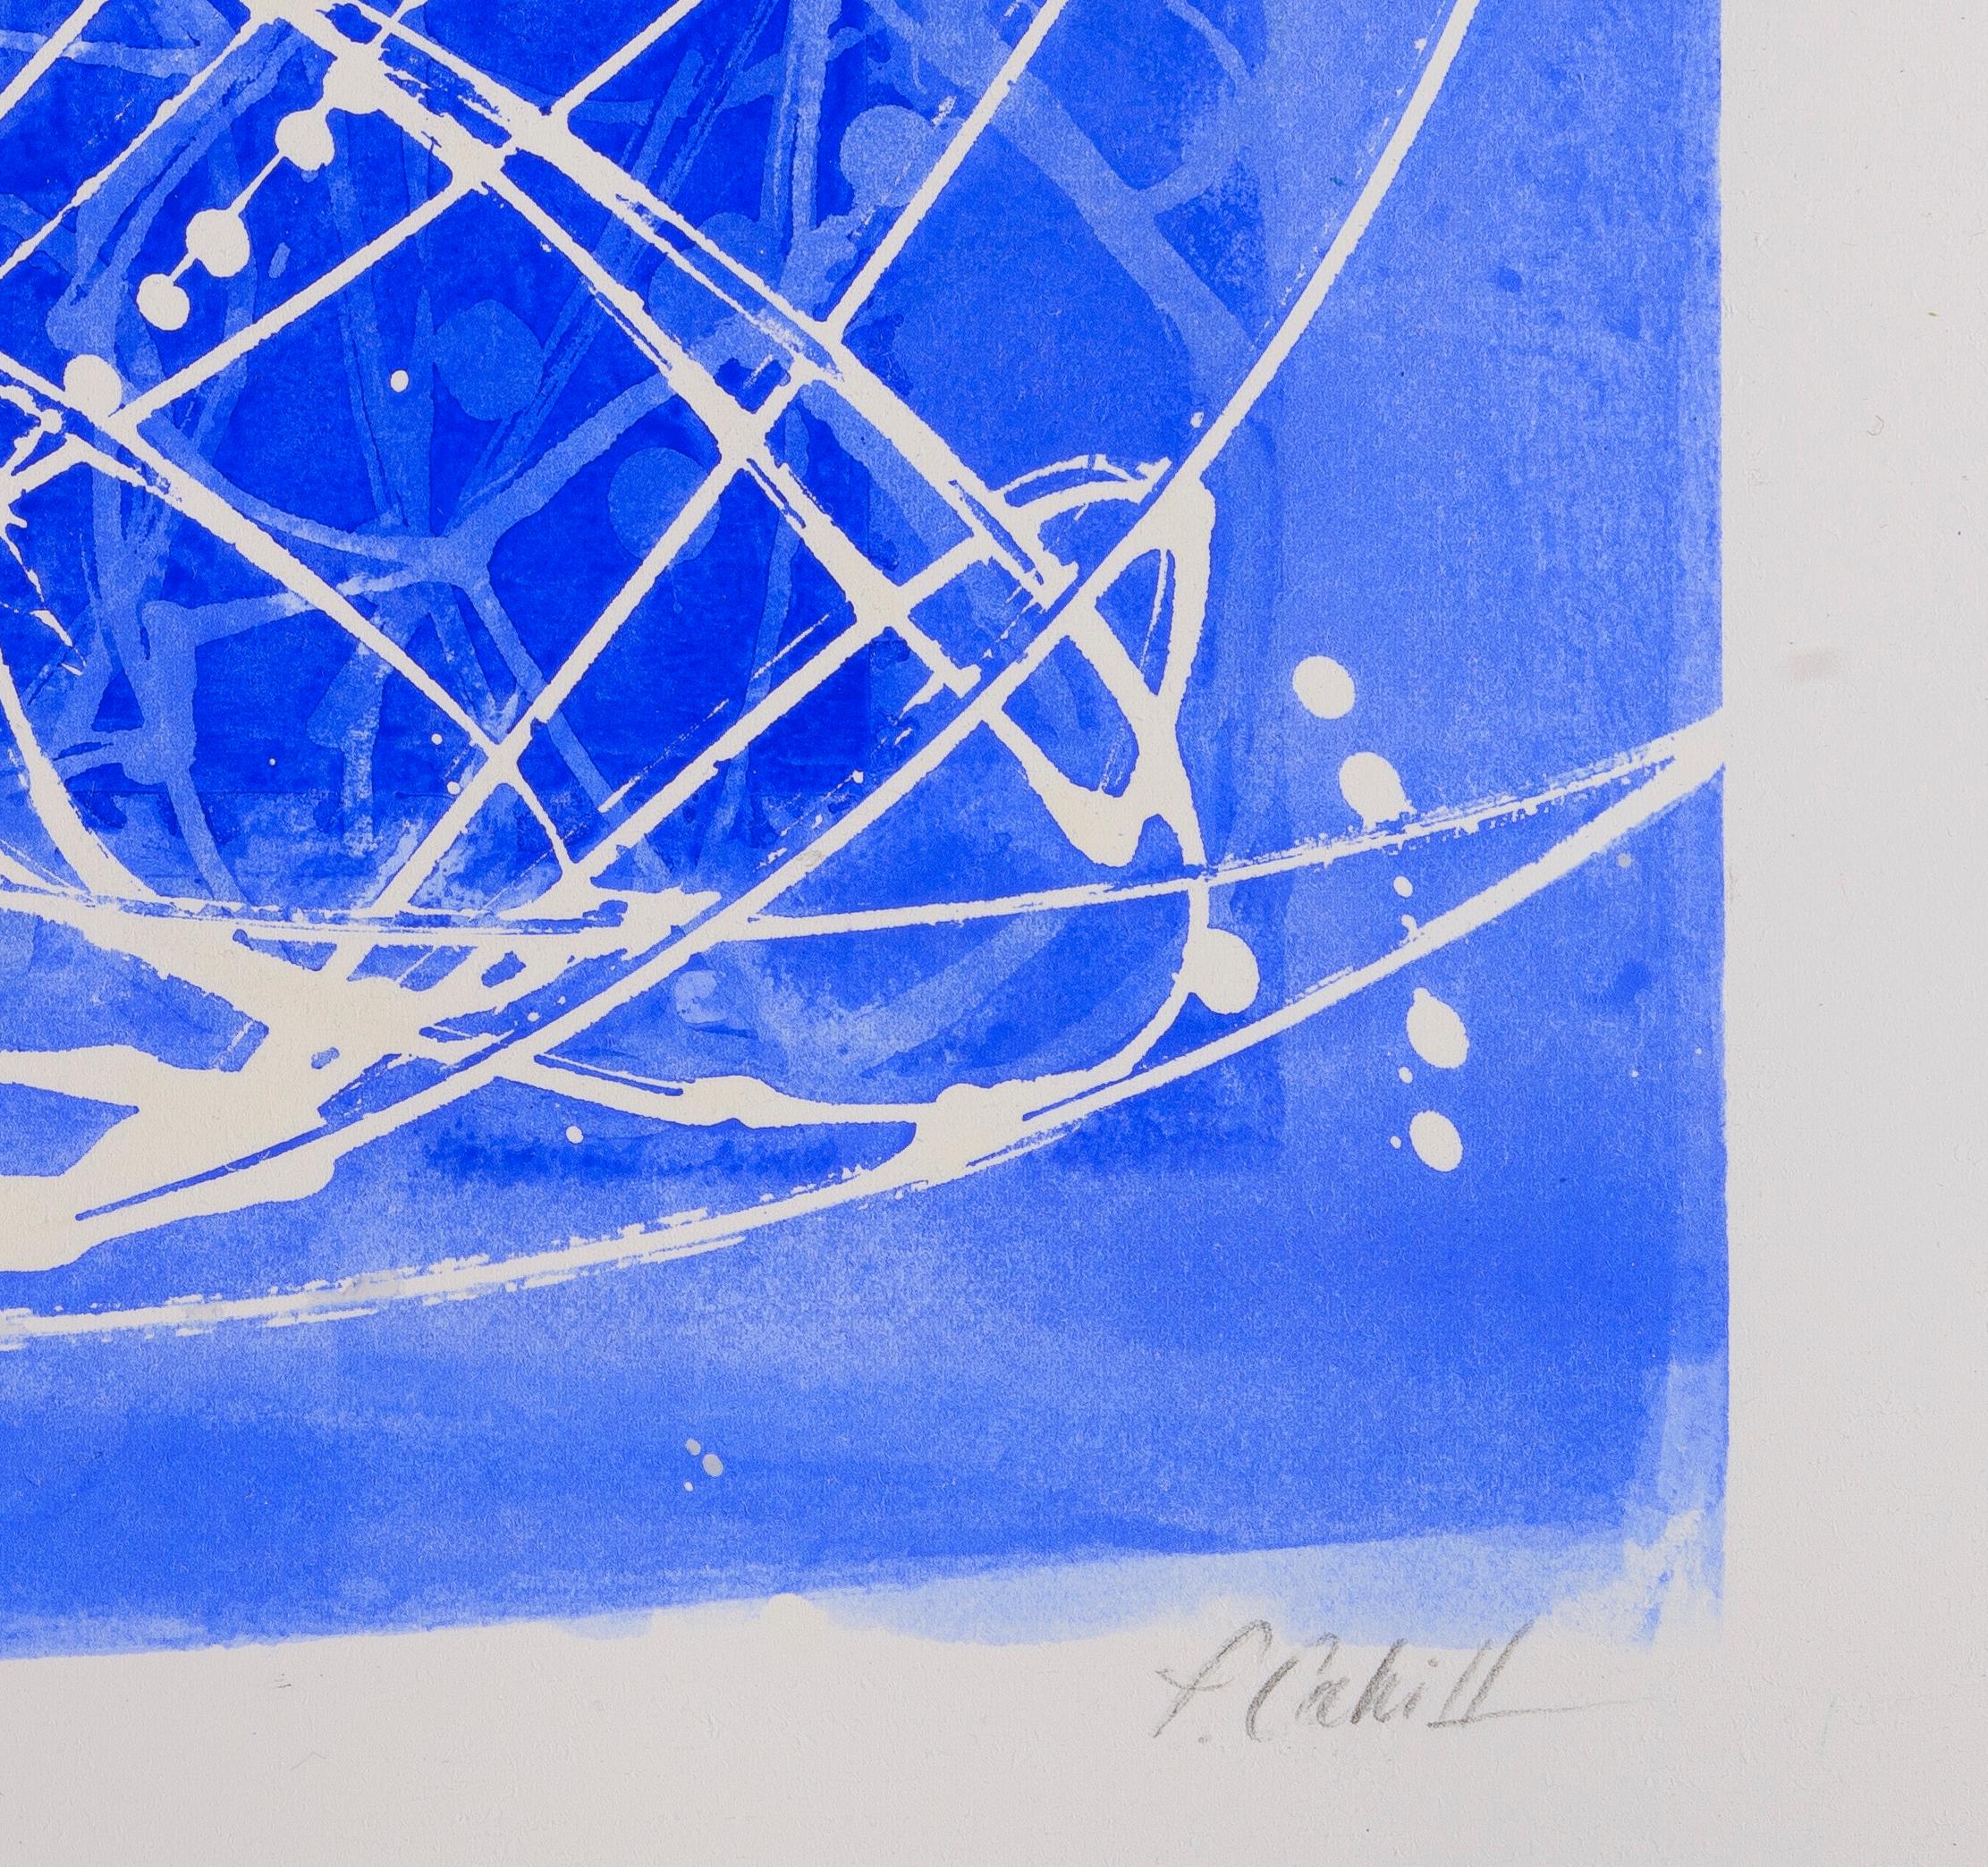 02H20: blue & white abstract expressionism painting/drawing on paper, framed - Abstract Art by Paula Cahill